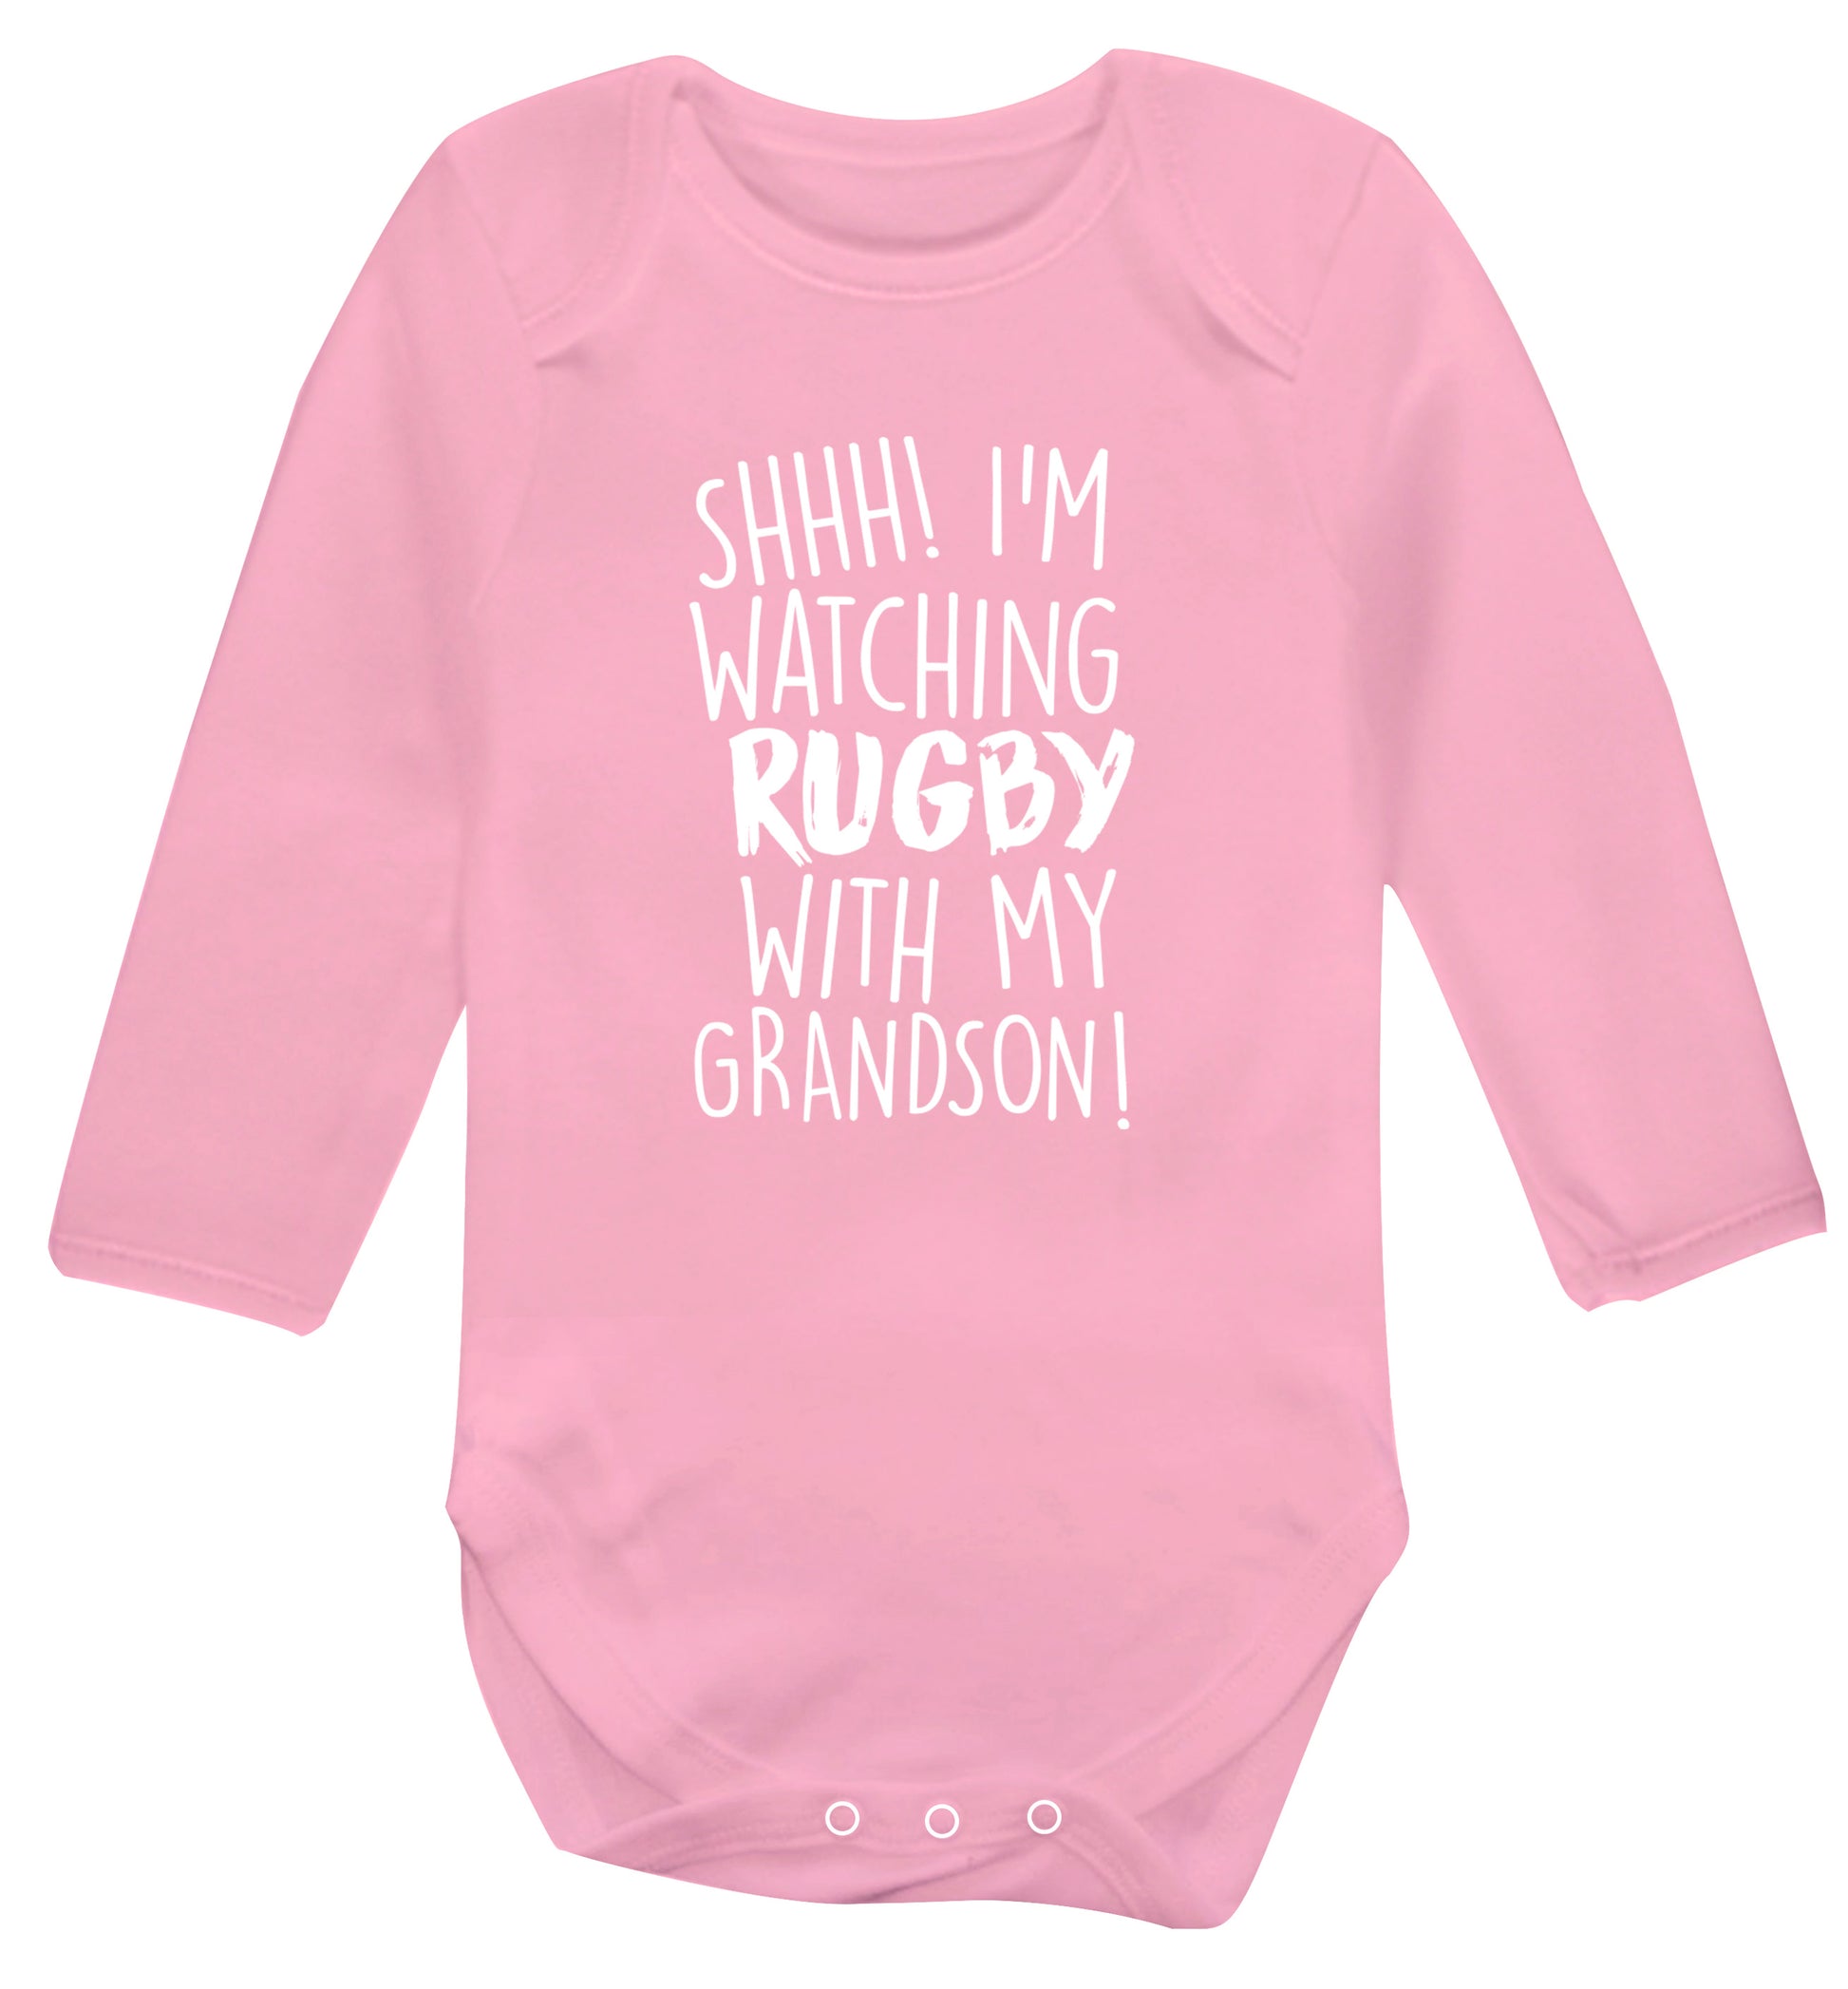 Shh I'm watching rugby with my grandson Baby Vest long sleeved pale pink 6-12 months